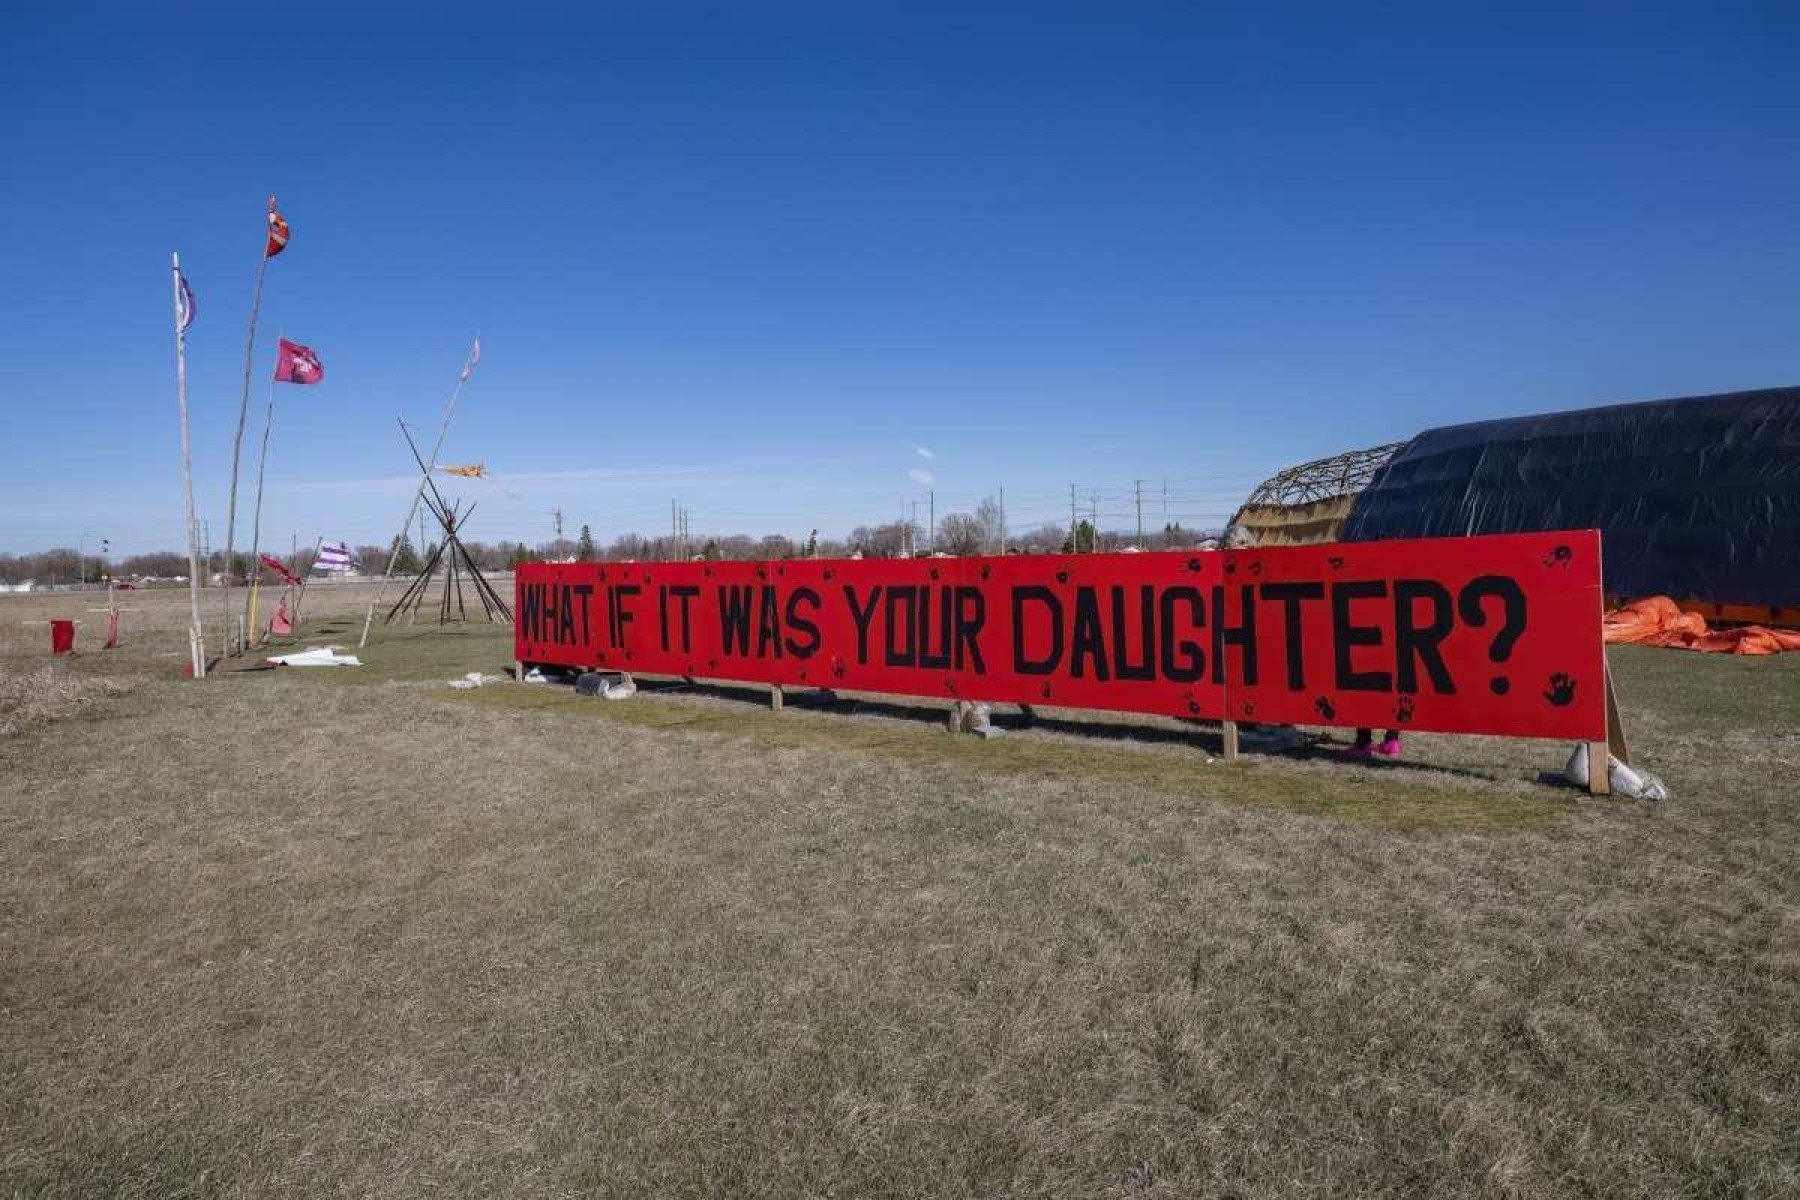  A sign is displayed at the entrance of a makeshift camp near near the Prairie Green landfill in Winnipeg, Manitoba, Canada, on April 27, 2024. The camp set up by the family of slained Morgan Harris take turns staying in the camp, seeking, says Morgan's daughter Elle Harris, 